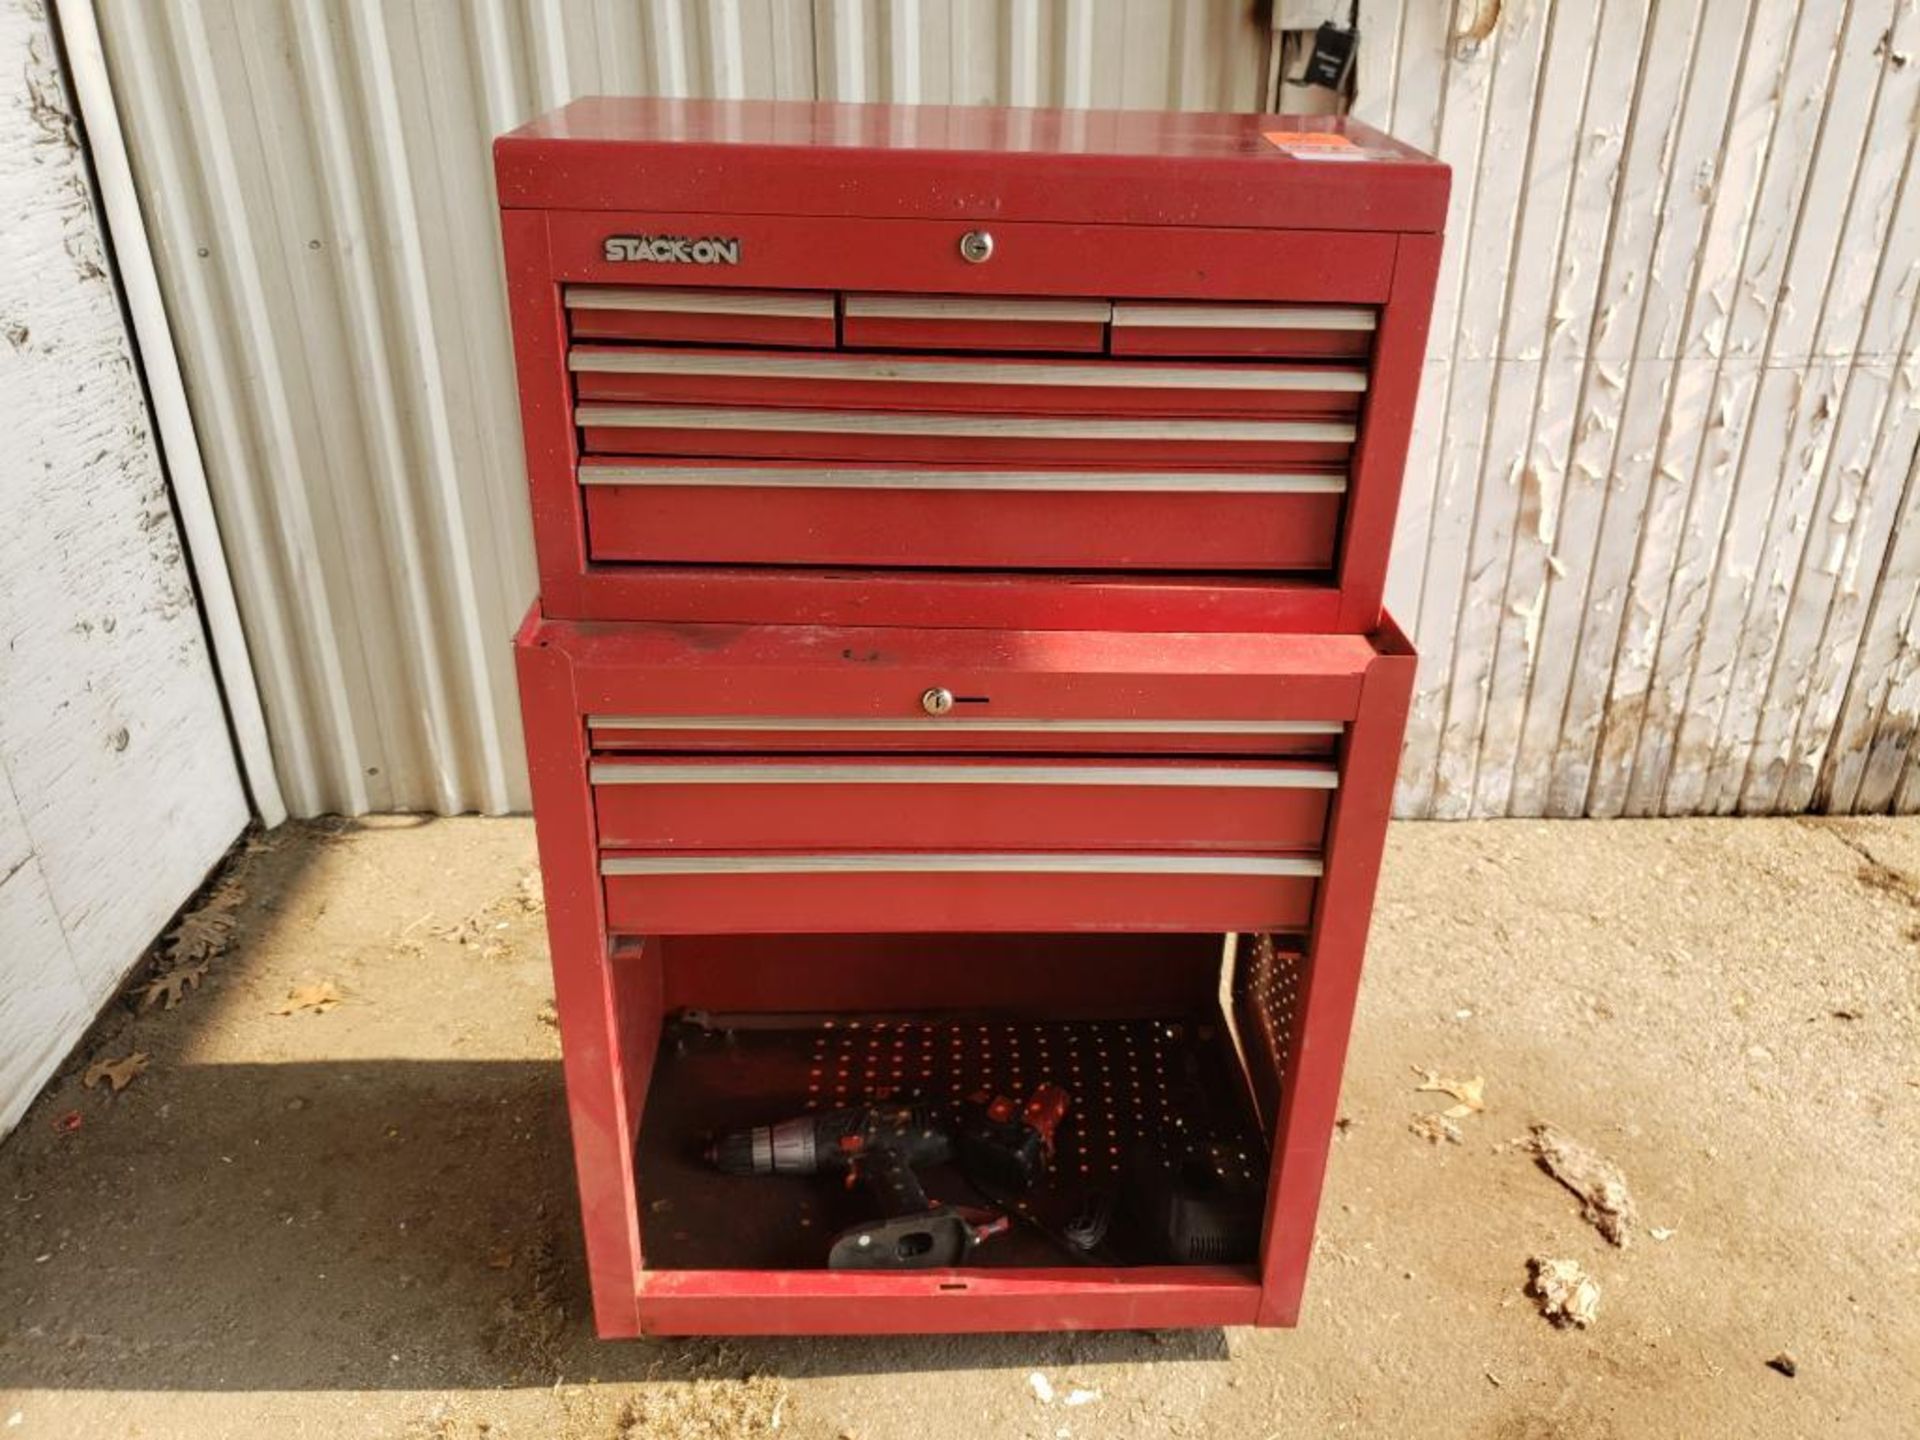 Stack-On Rolling tool box cabinet. 26x16x43 WxDxH.